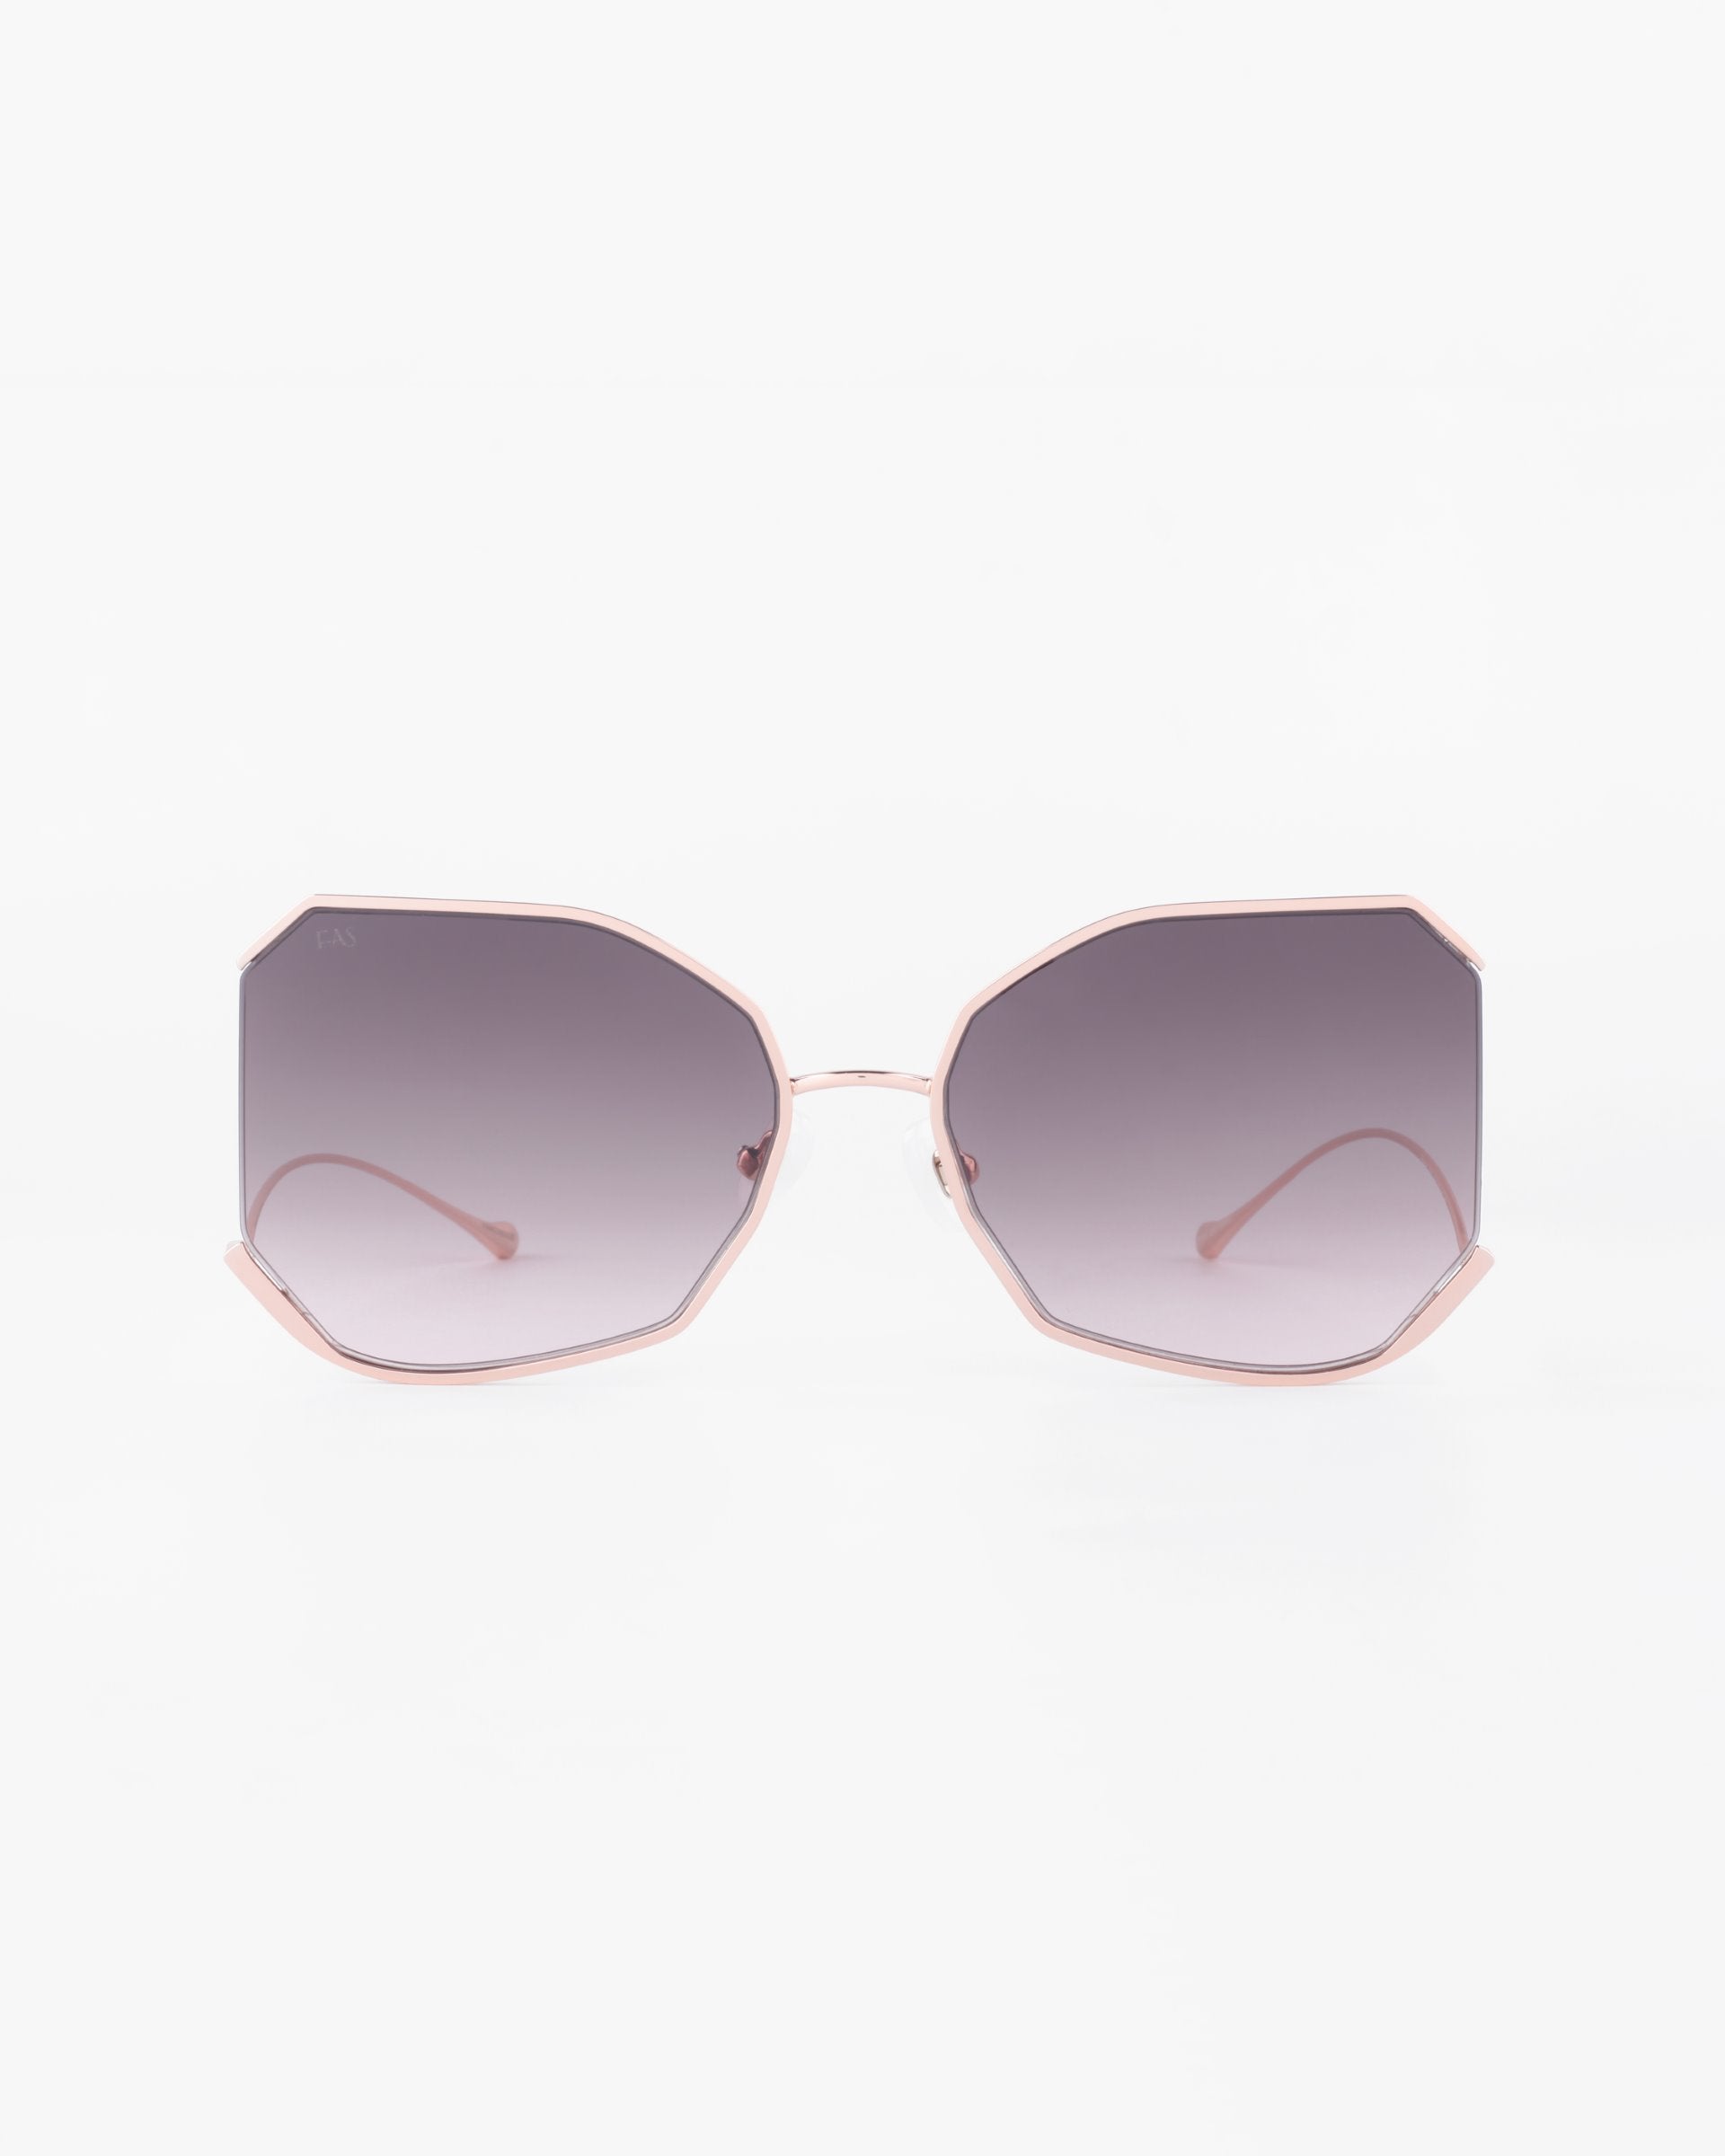 A pair of stylish For Art&#39;s Sake® Painter sunglasses with large, octagonal lenses that are tinted in a gradient from dark to light. Crafted with ultra-lightweight nylon lenses offering 100% UVA &amp; UVB protection, the thin gold-plated stainless steel frame and temples are a soft pink color, enhancing the contemporary and chic aesthetic. The background is plain white.